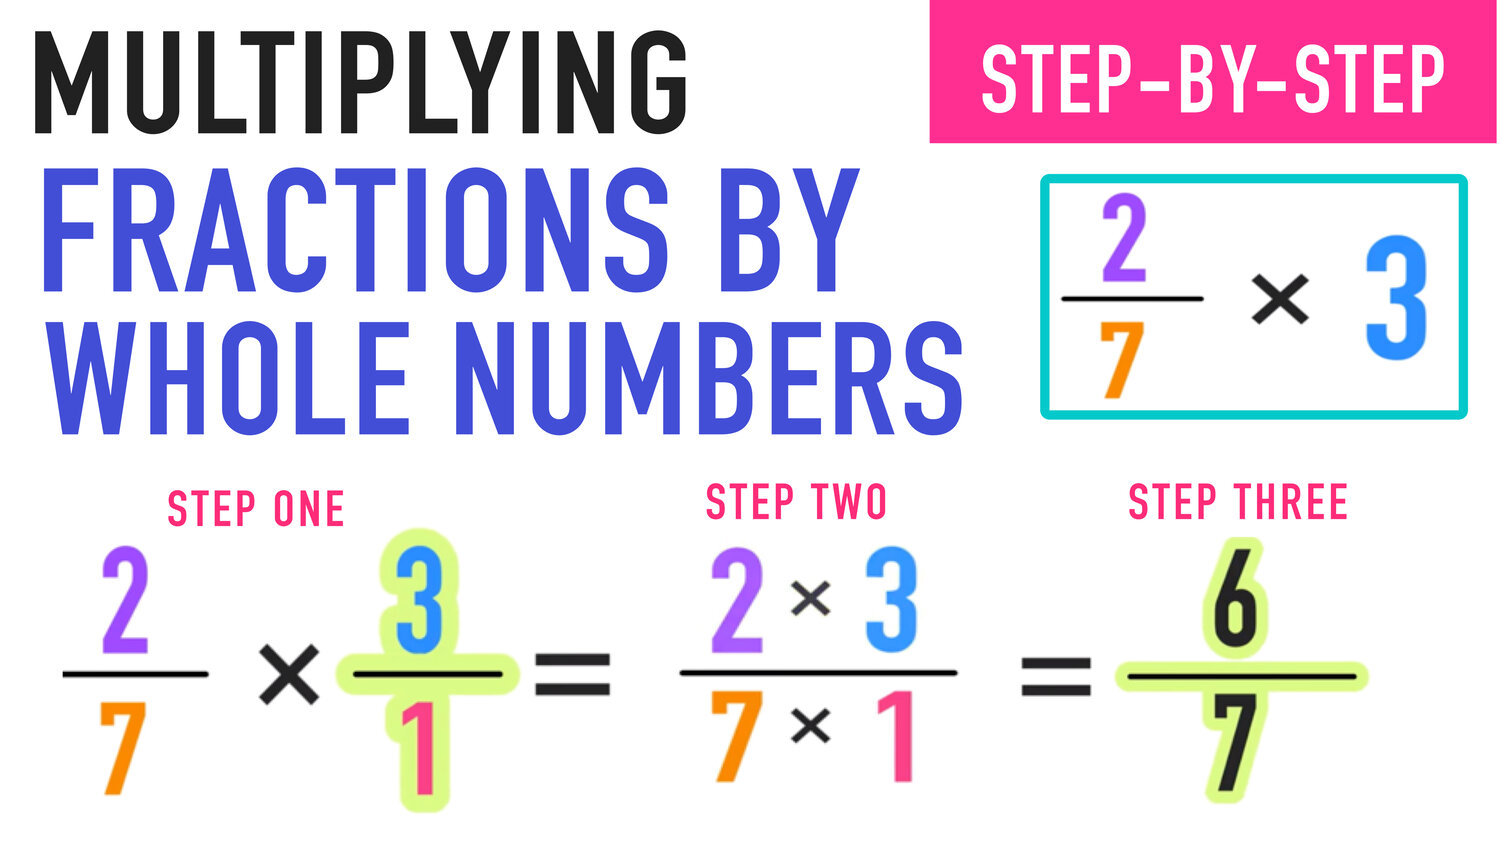 Multiplying Fractions by Whole Numbers: Your Complete Guide